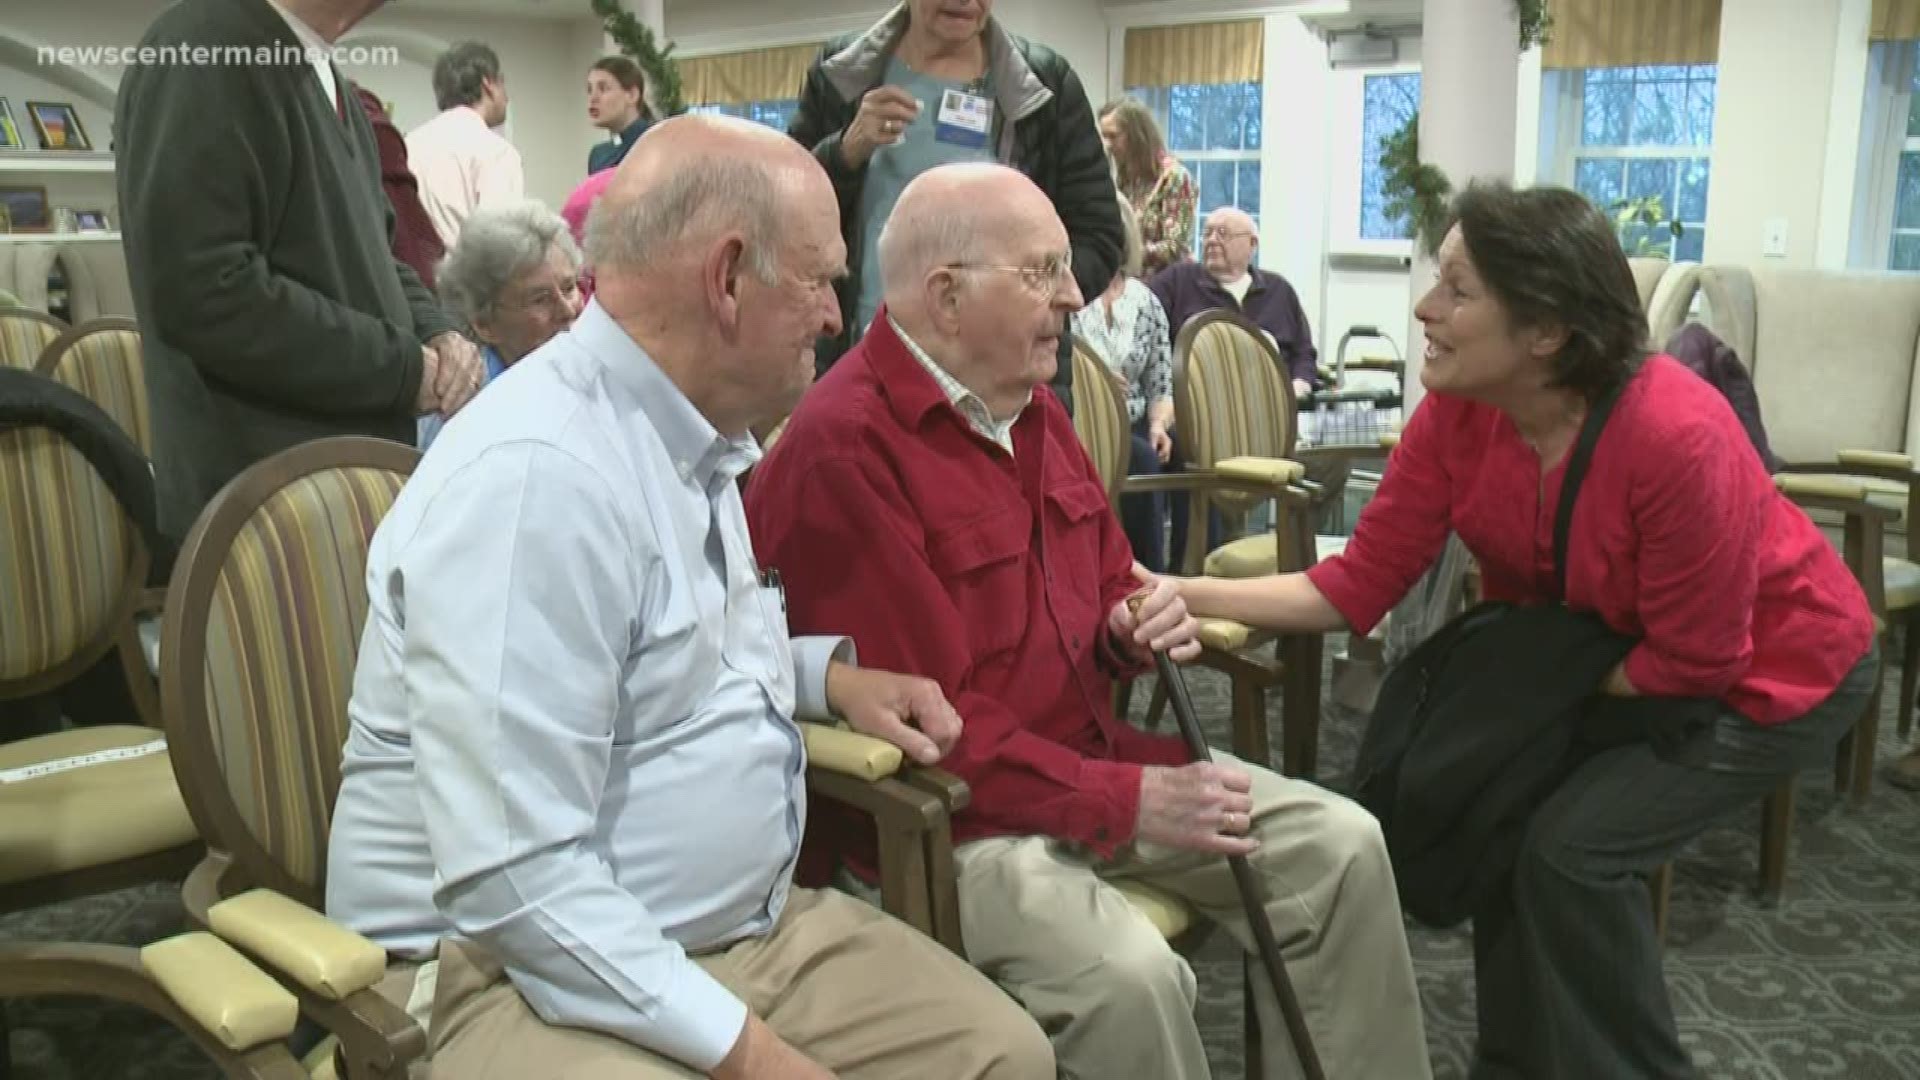 Falmouth man wins Gold Cane for being the oldest person in town.